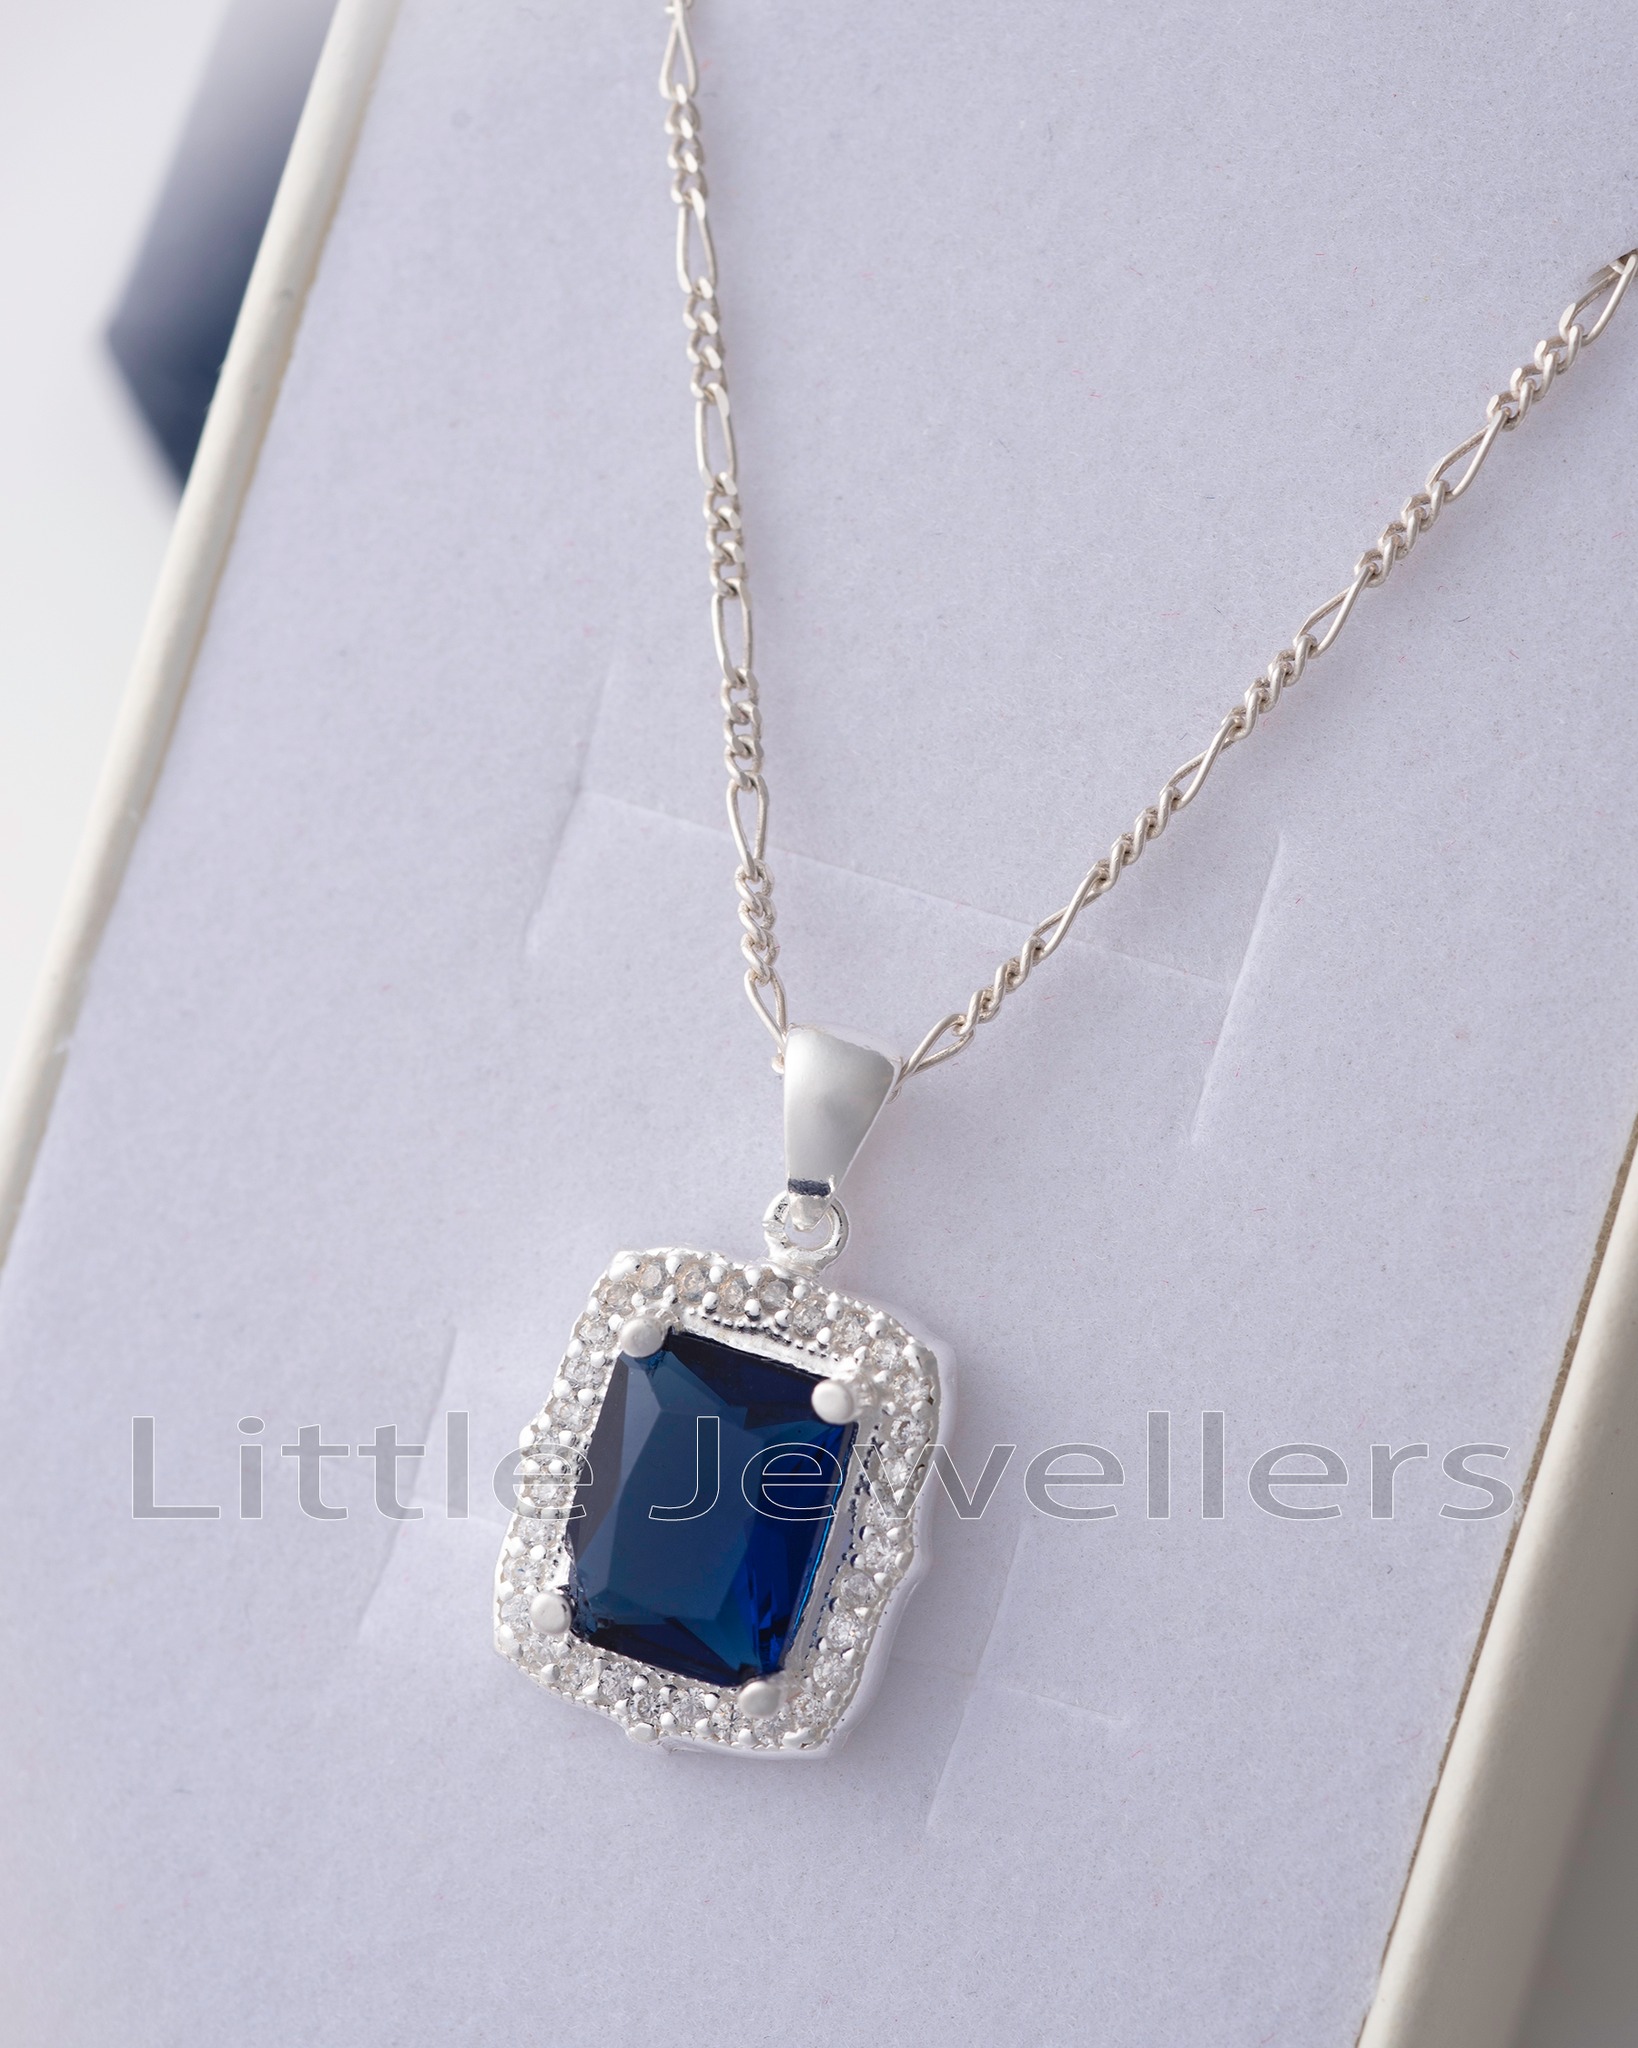 Add a touch of elegance to your look with this stunning Sterling Silver CZ Sapphire Blue Necklace. Its beautiful sapphire blue color and figaro silver chain make it perfect for everyday wear.